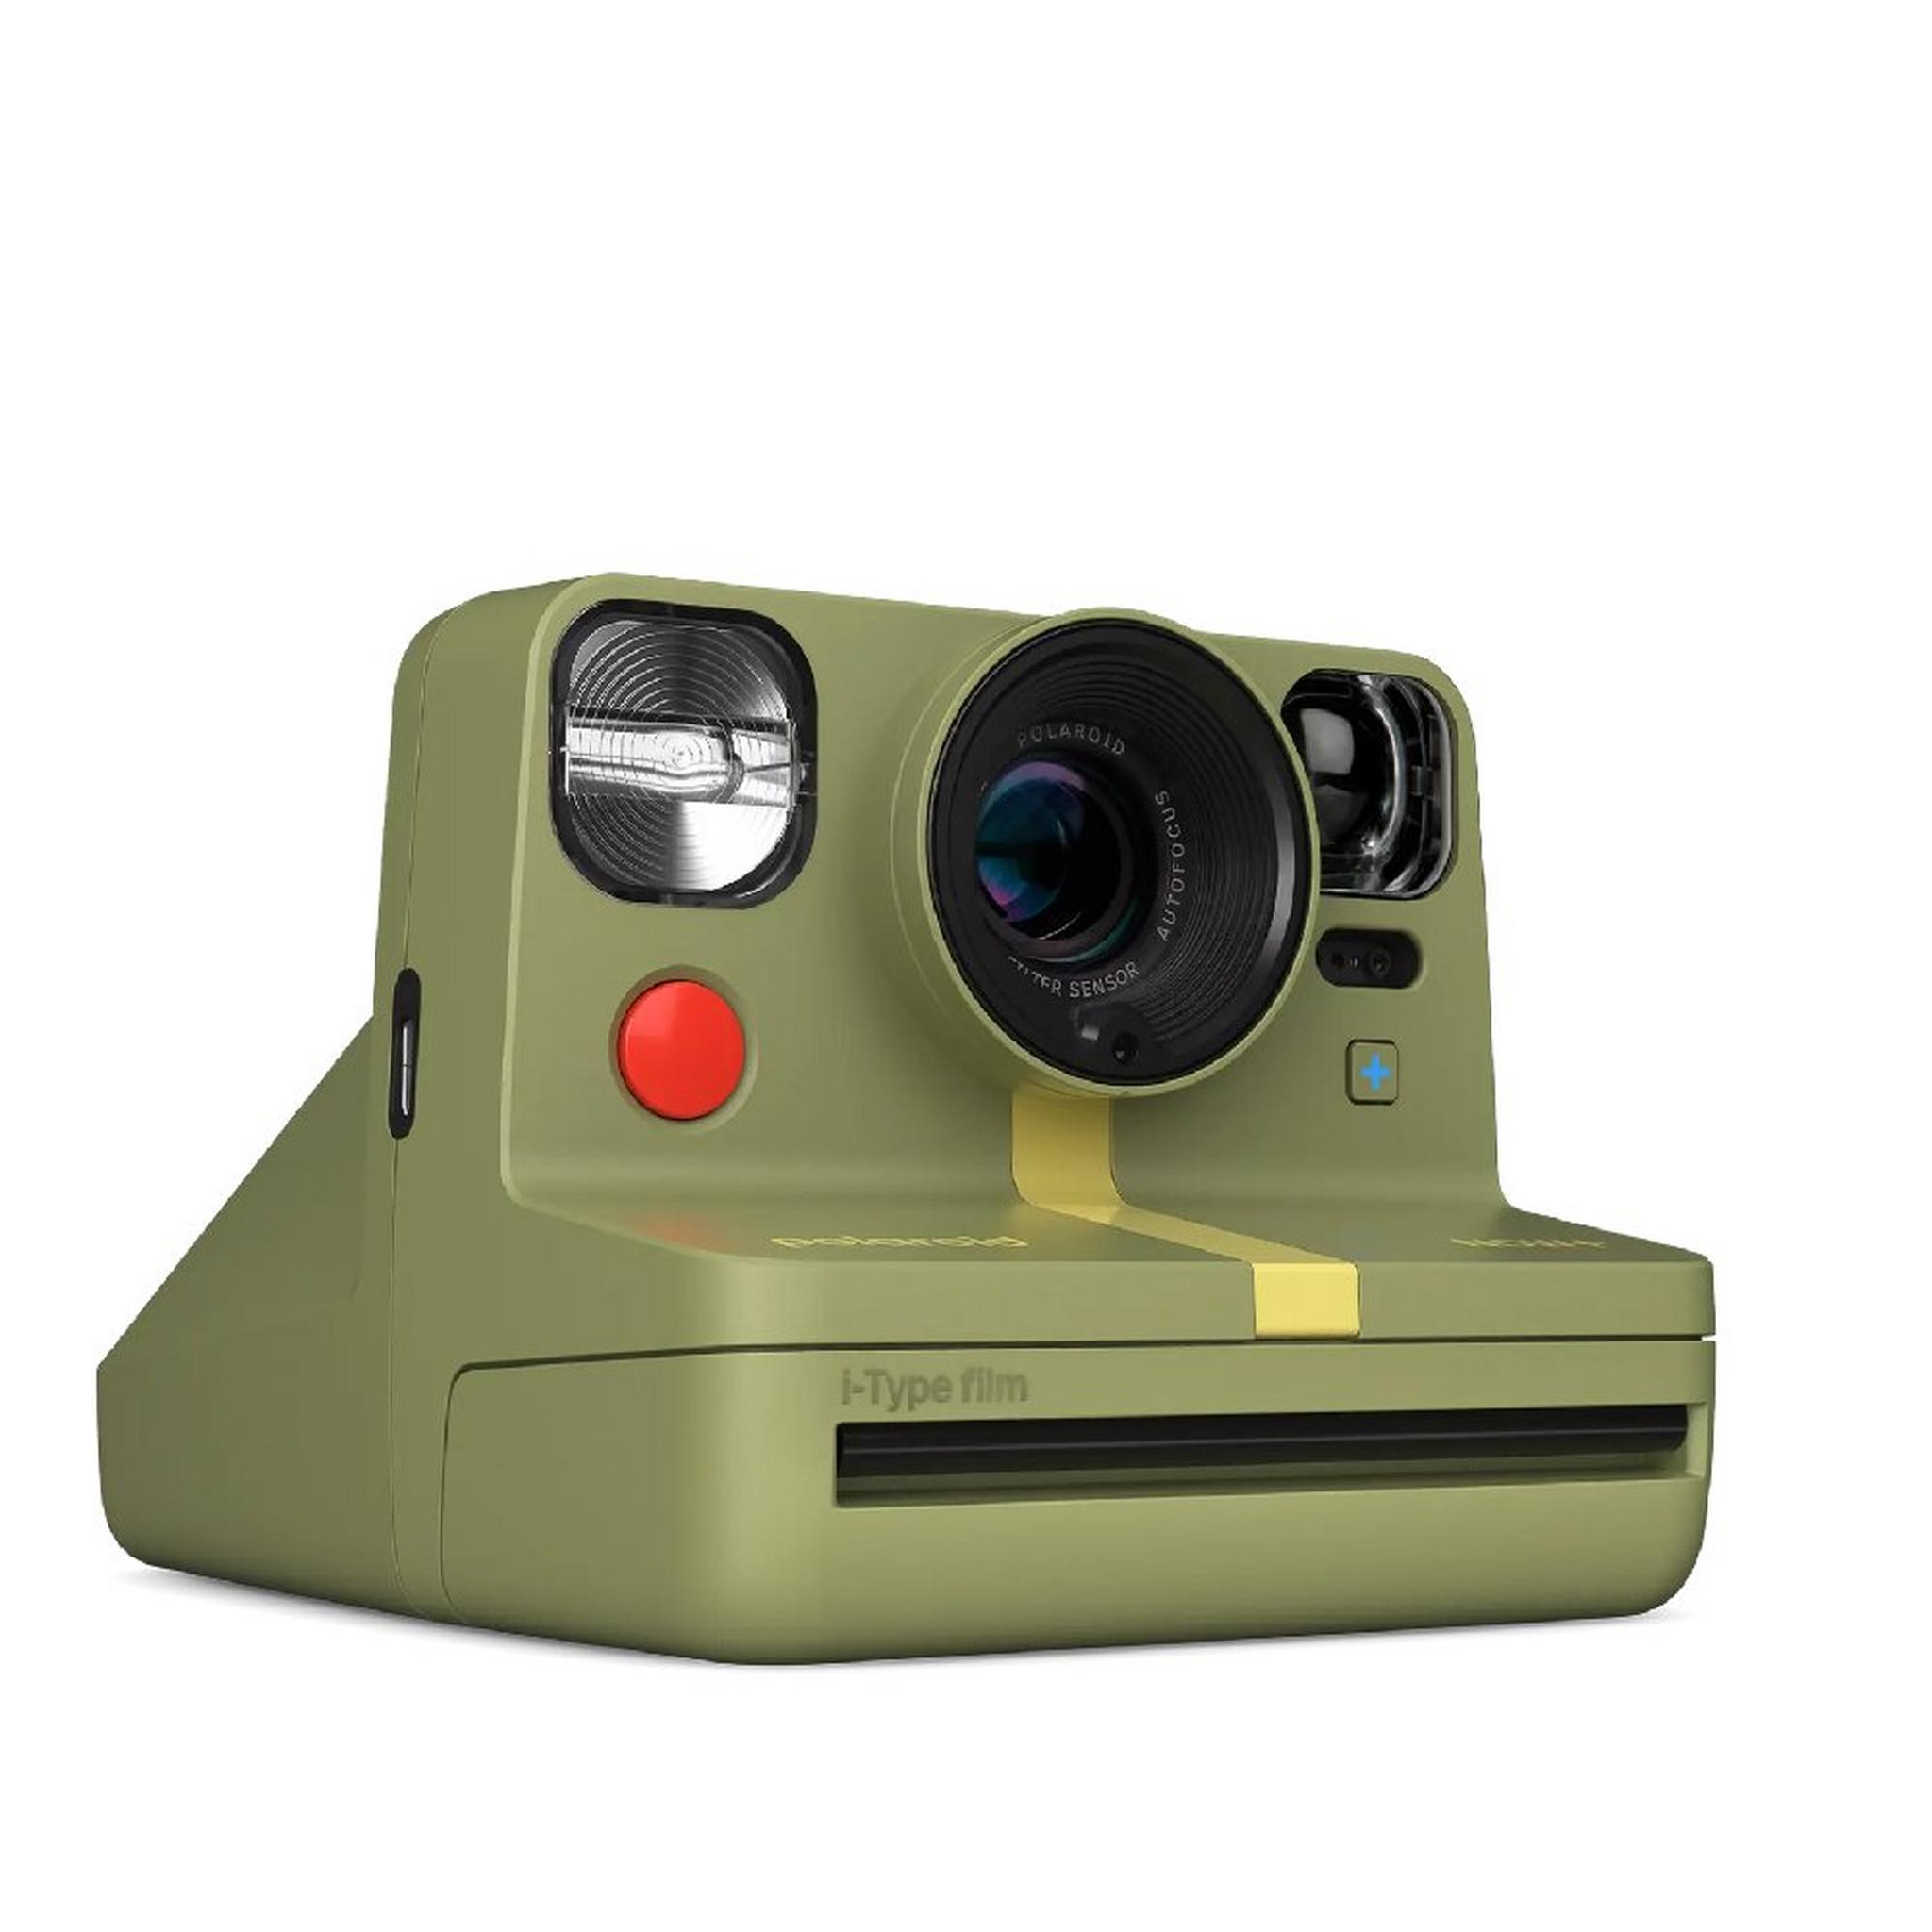 Polaroid Now + Generation 2 i-Type Instant Camera, 009075 - Forest Green